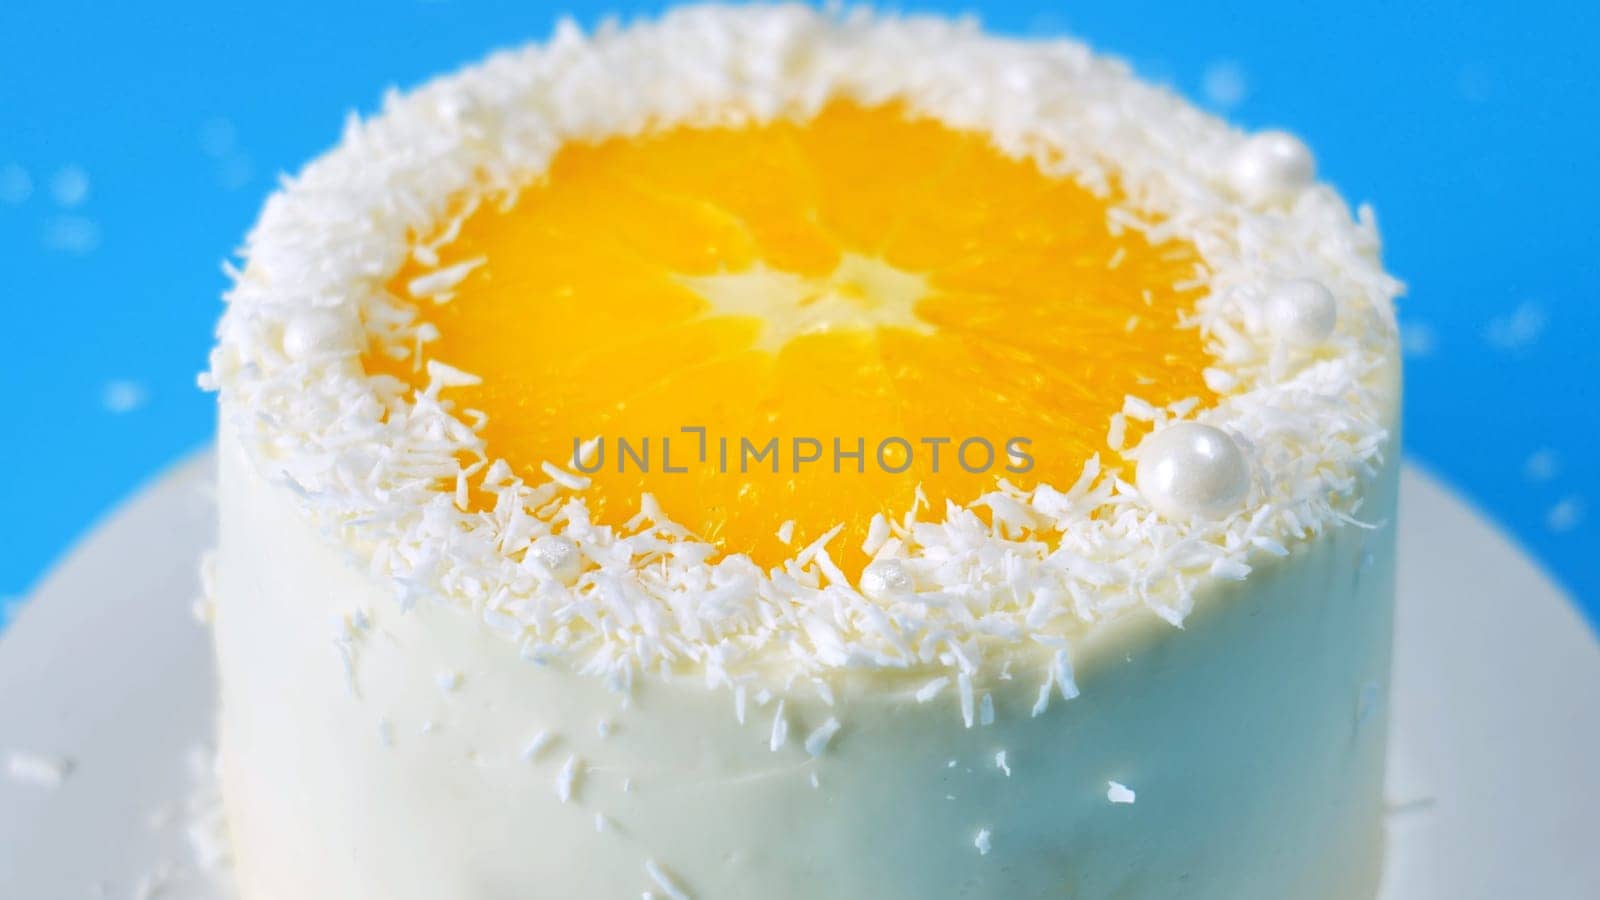 Cake with orange and coconut shavings spinning on a blue background